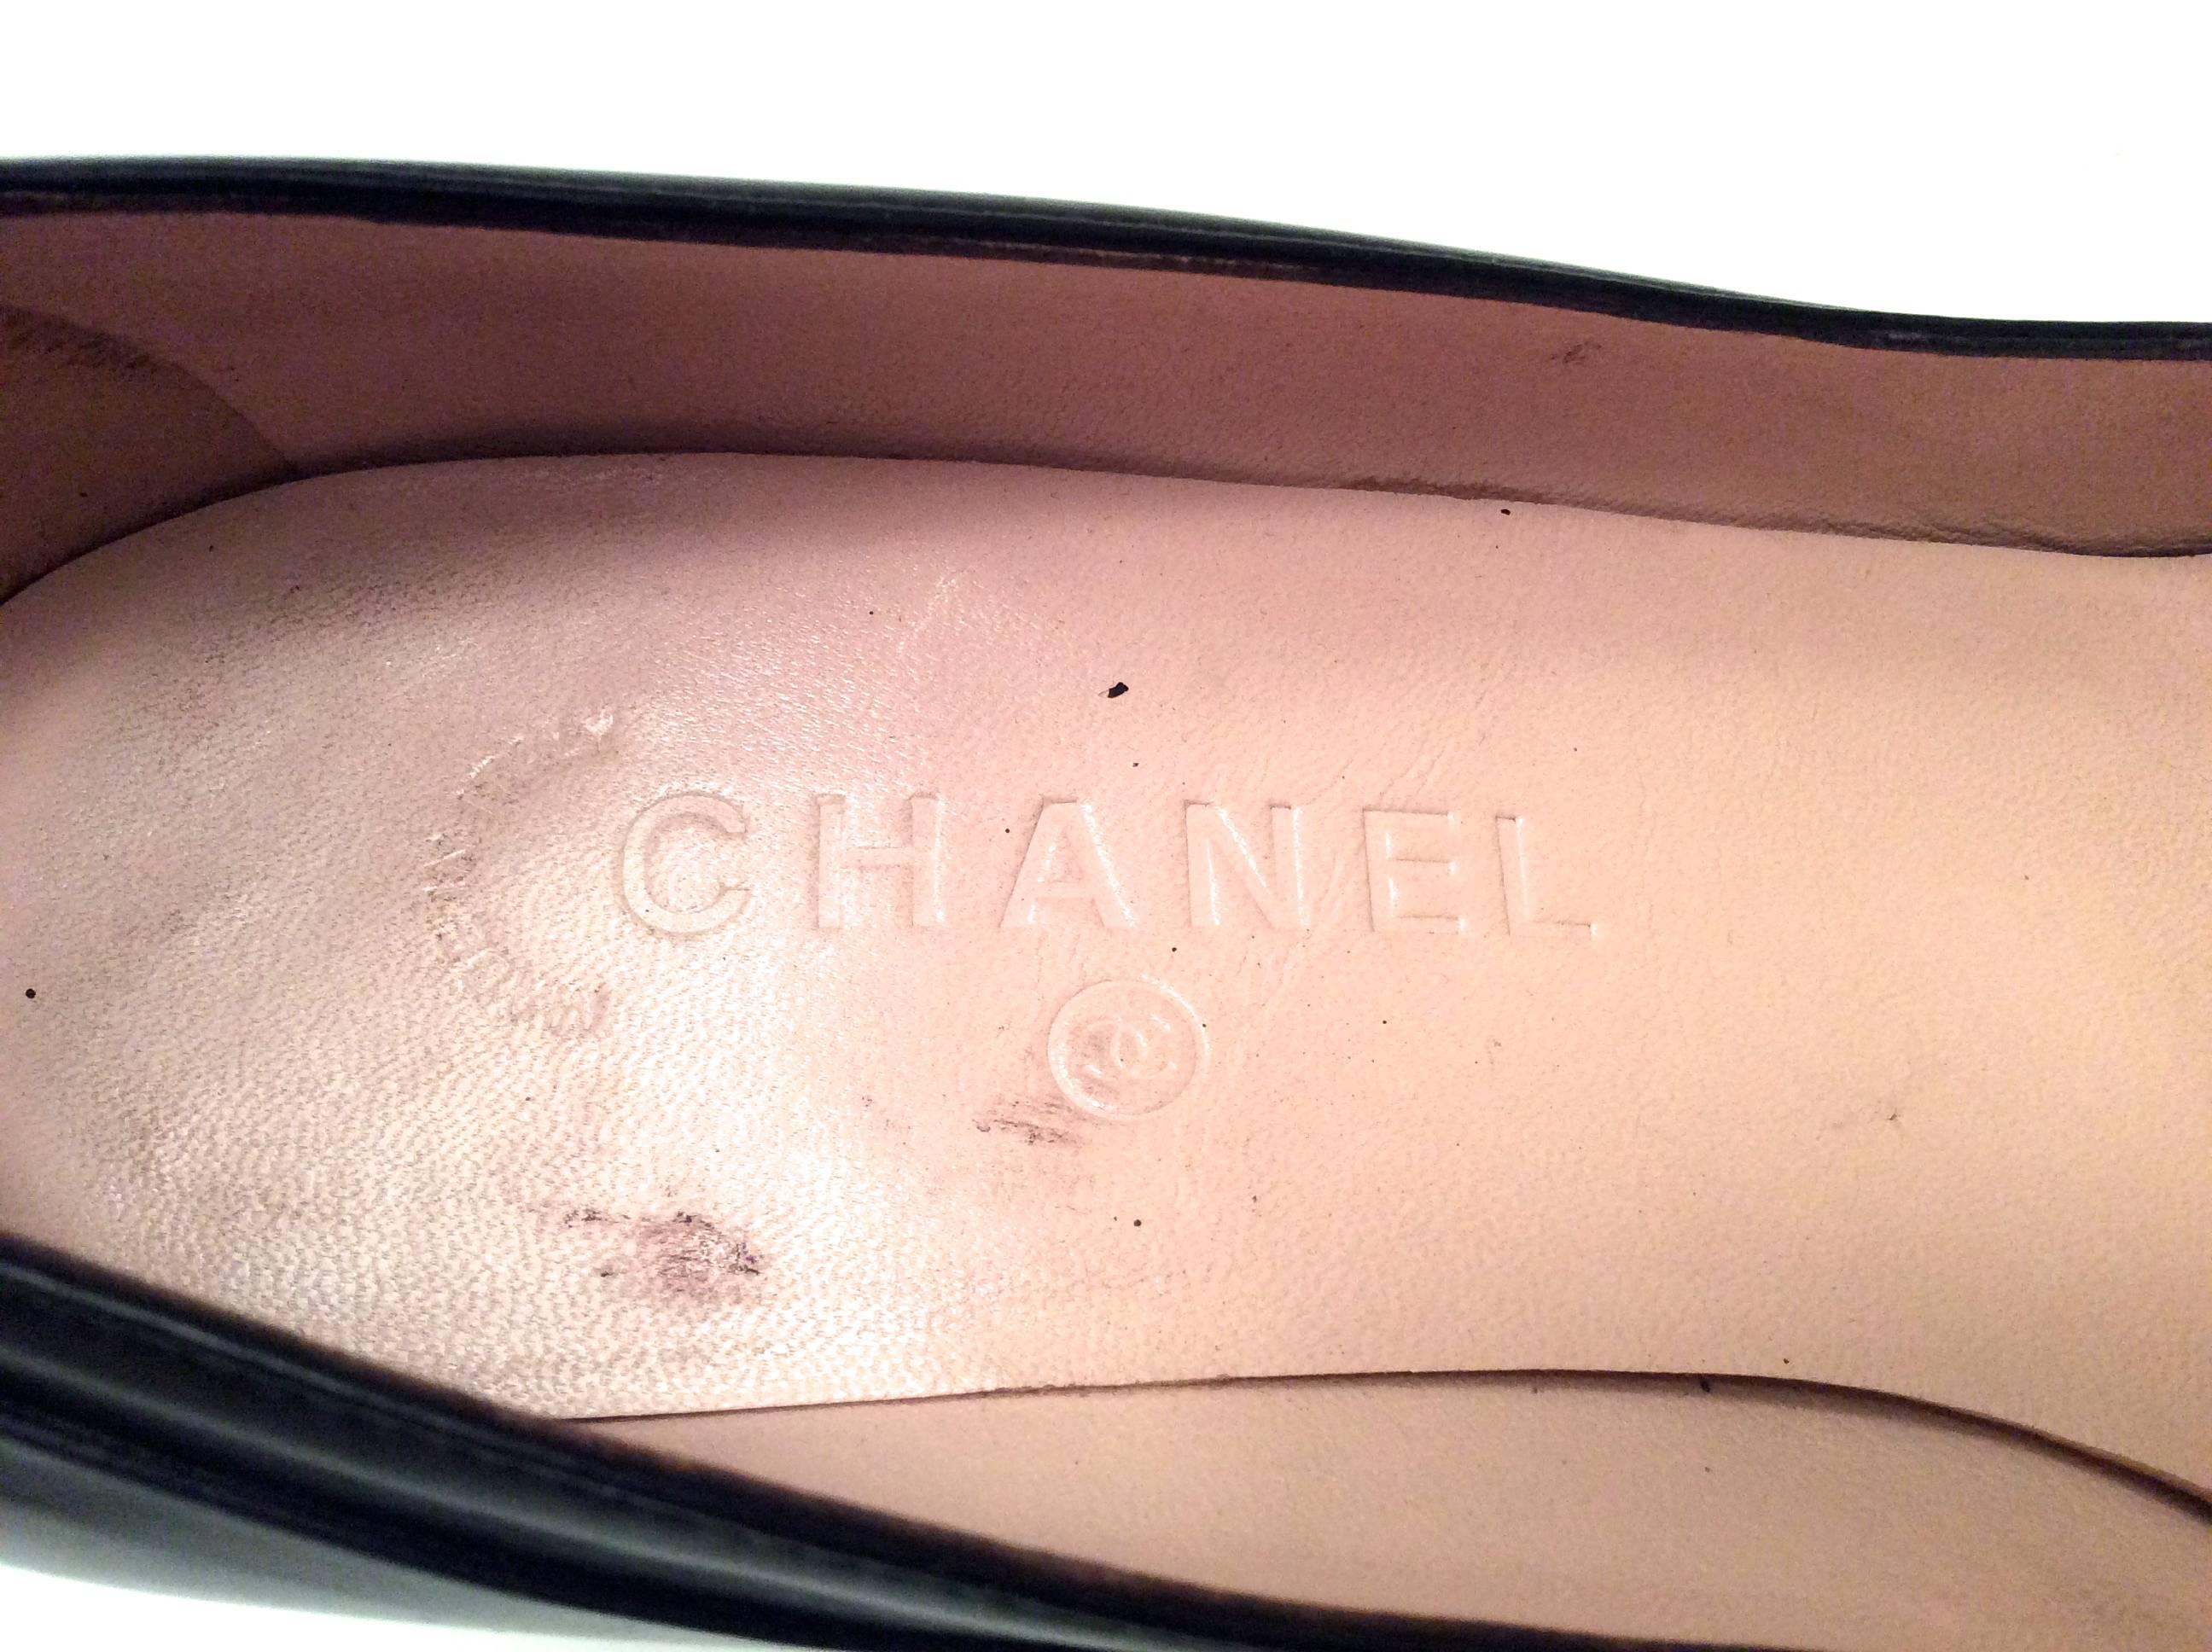 Chanel Dark Brown Leather Pumps - Size 38 In Excellent Condition For Sale In Boca Raton, FL